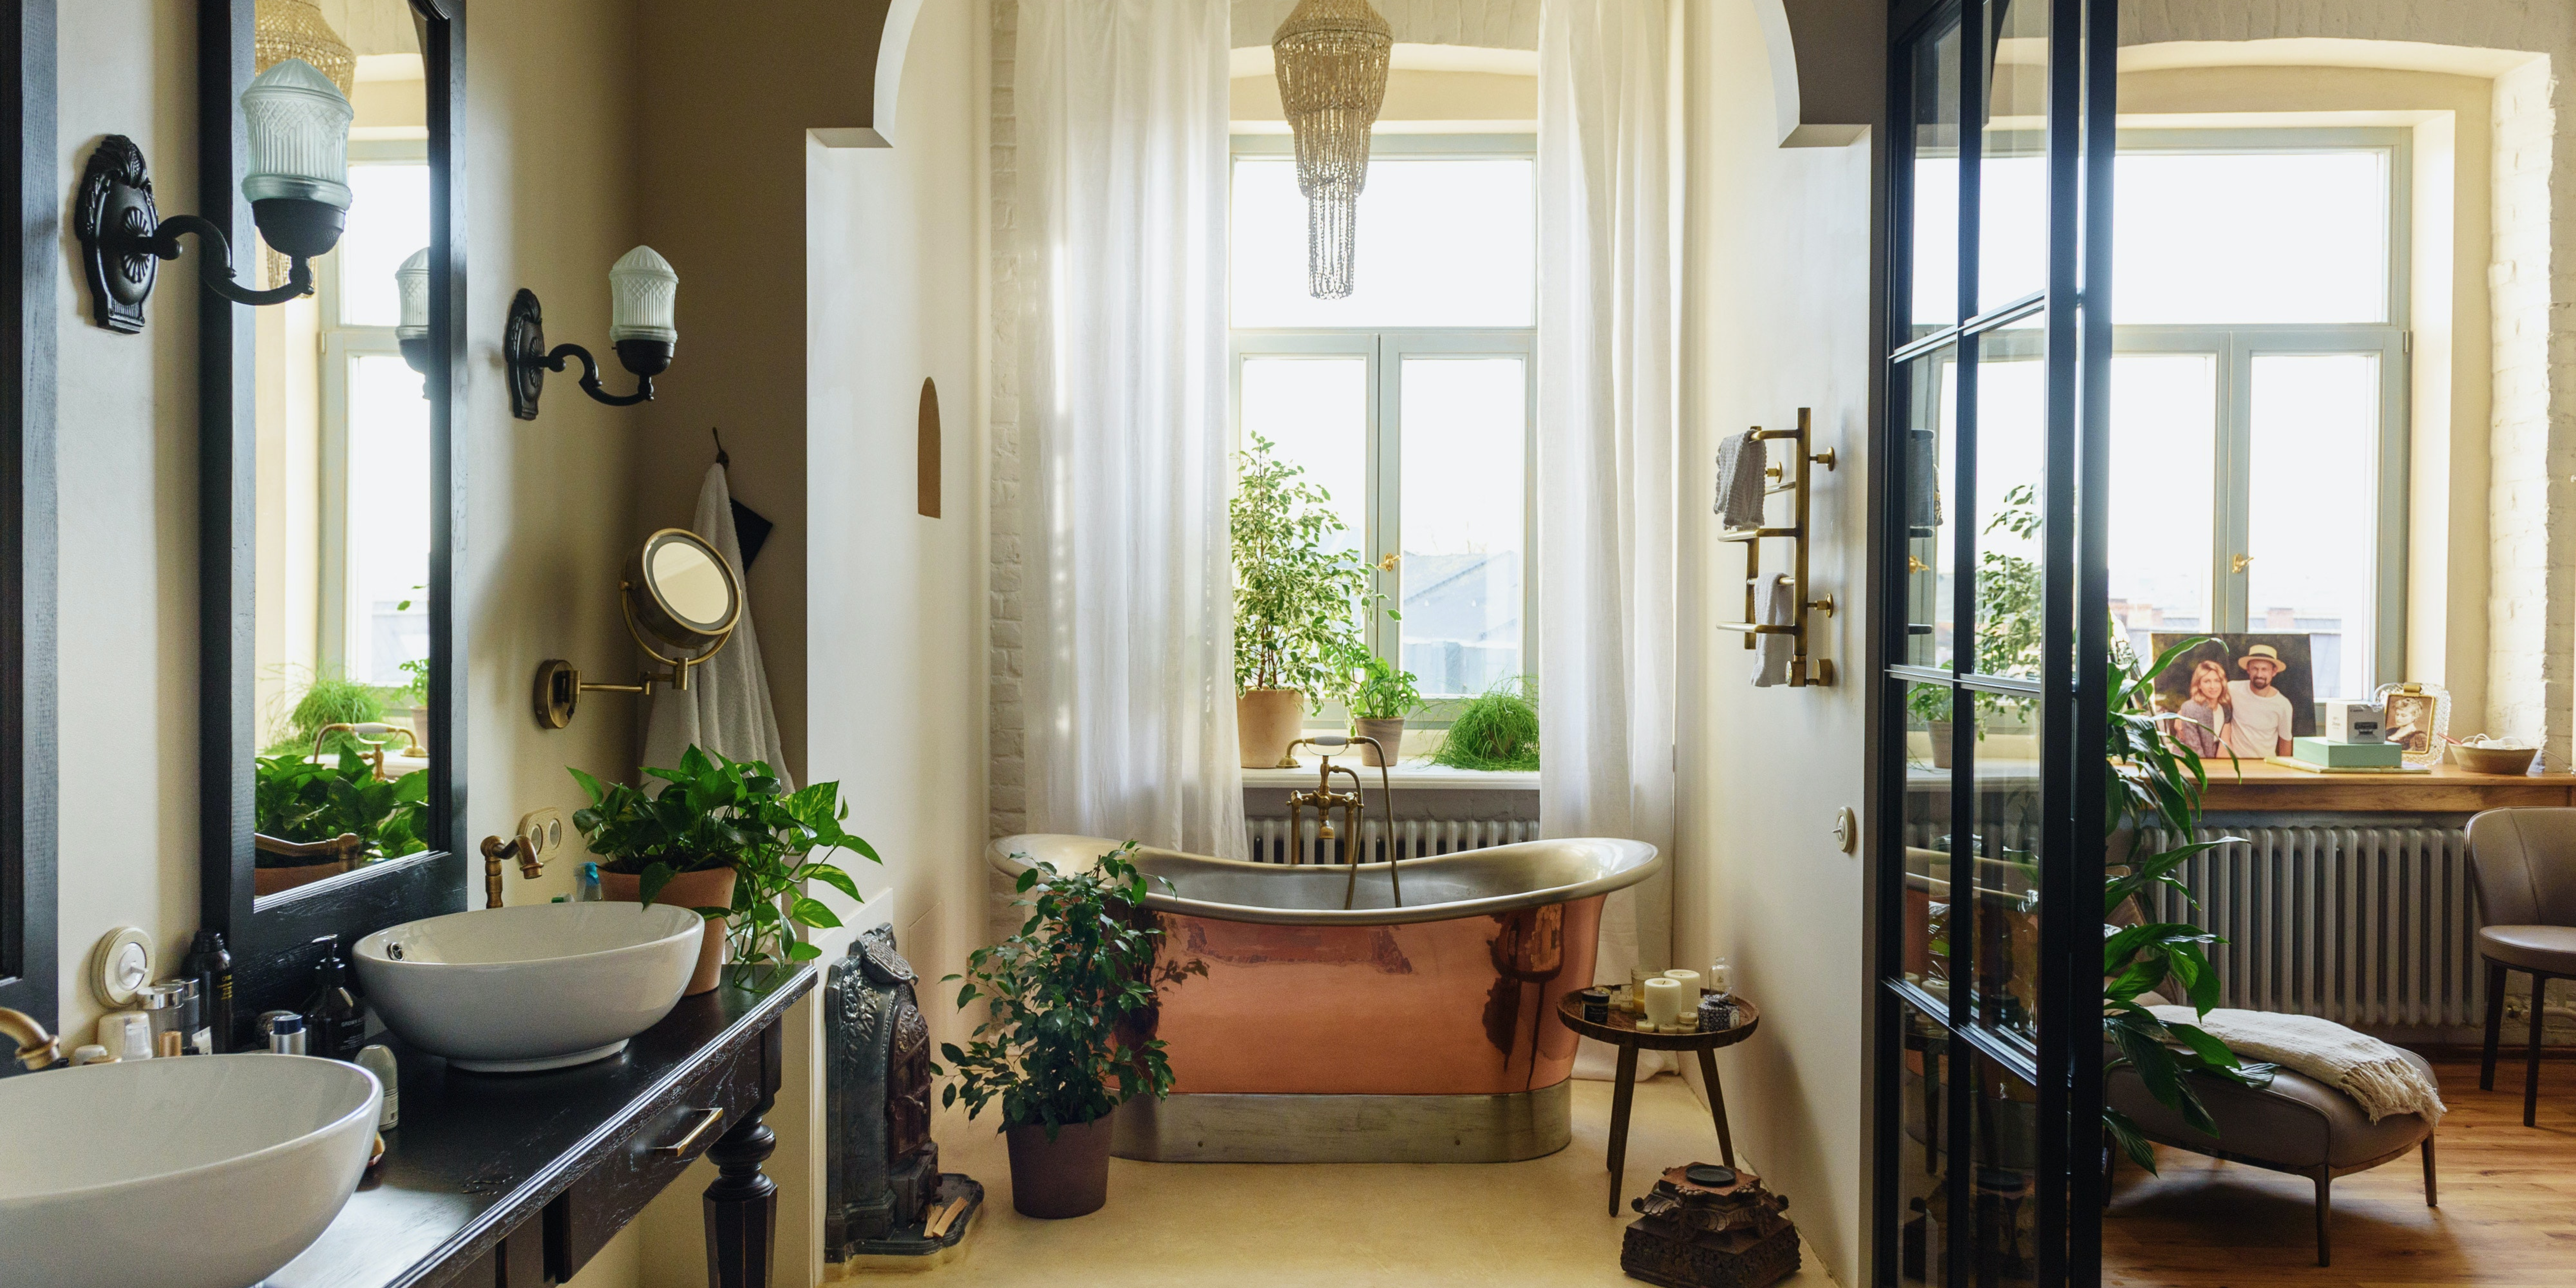 Essential Tips to Consider When Remodeling Your Bathroom